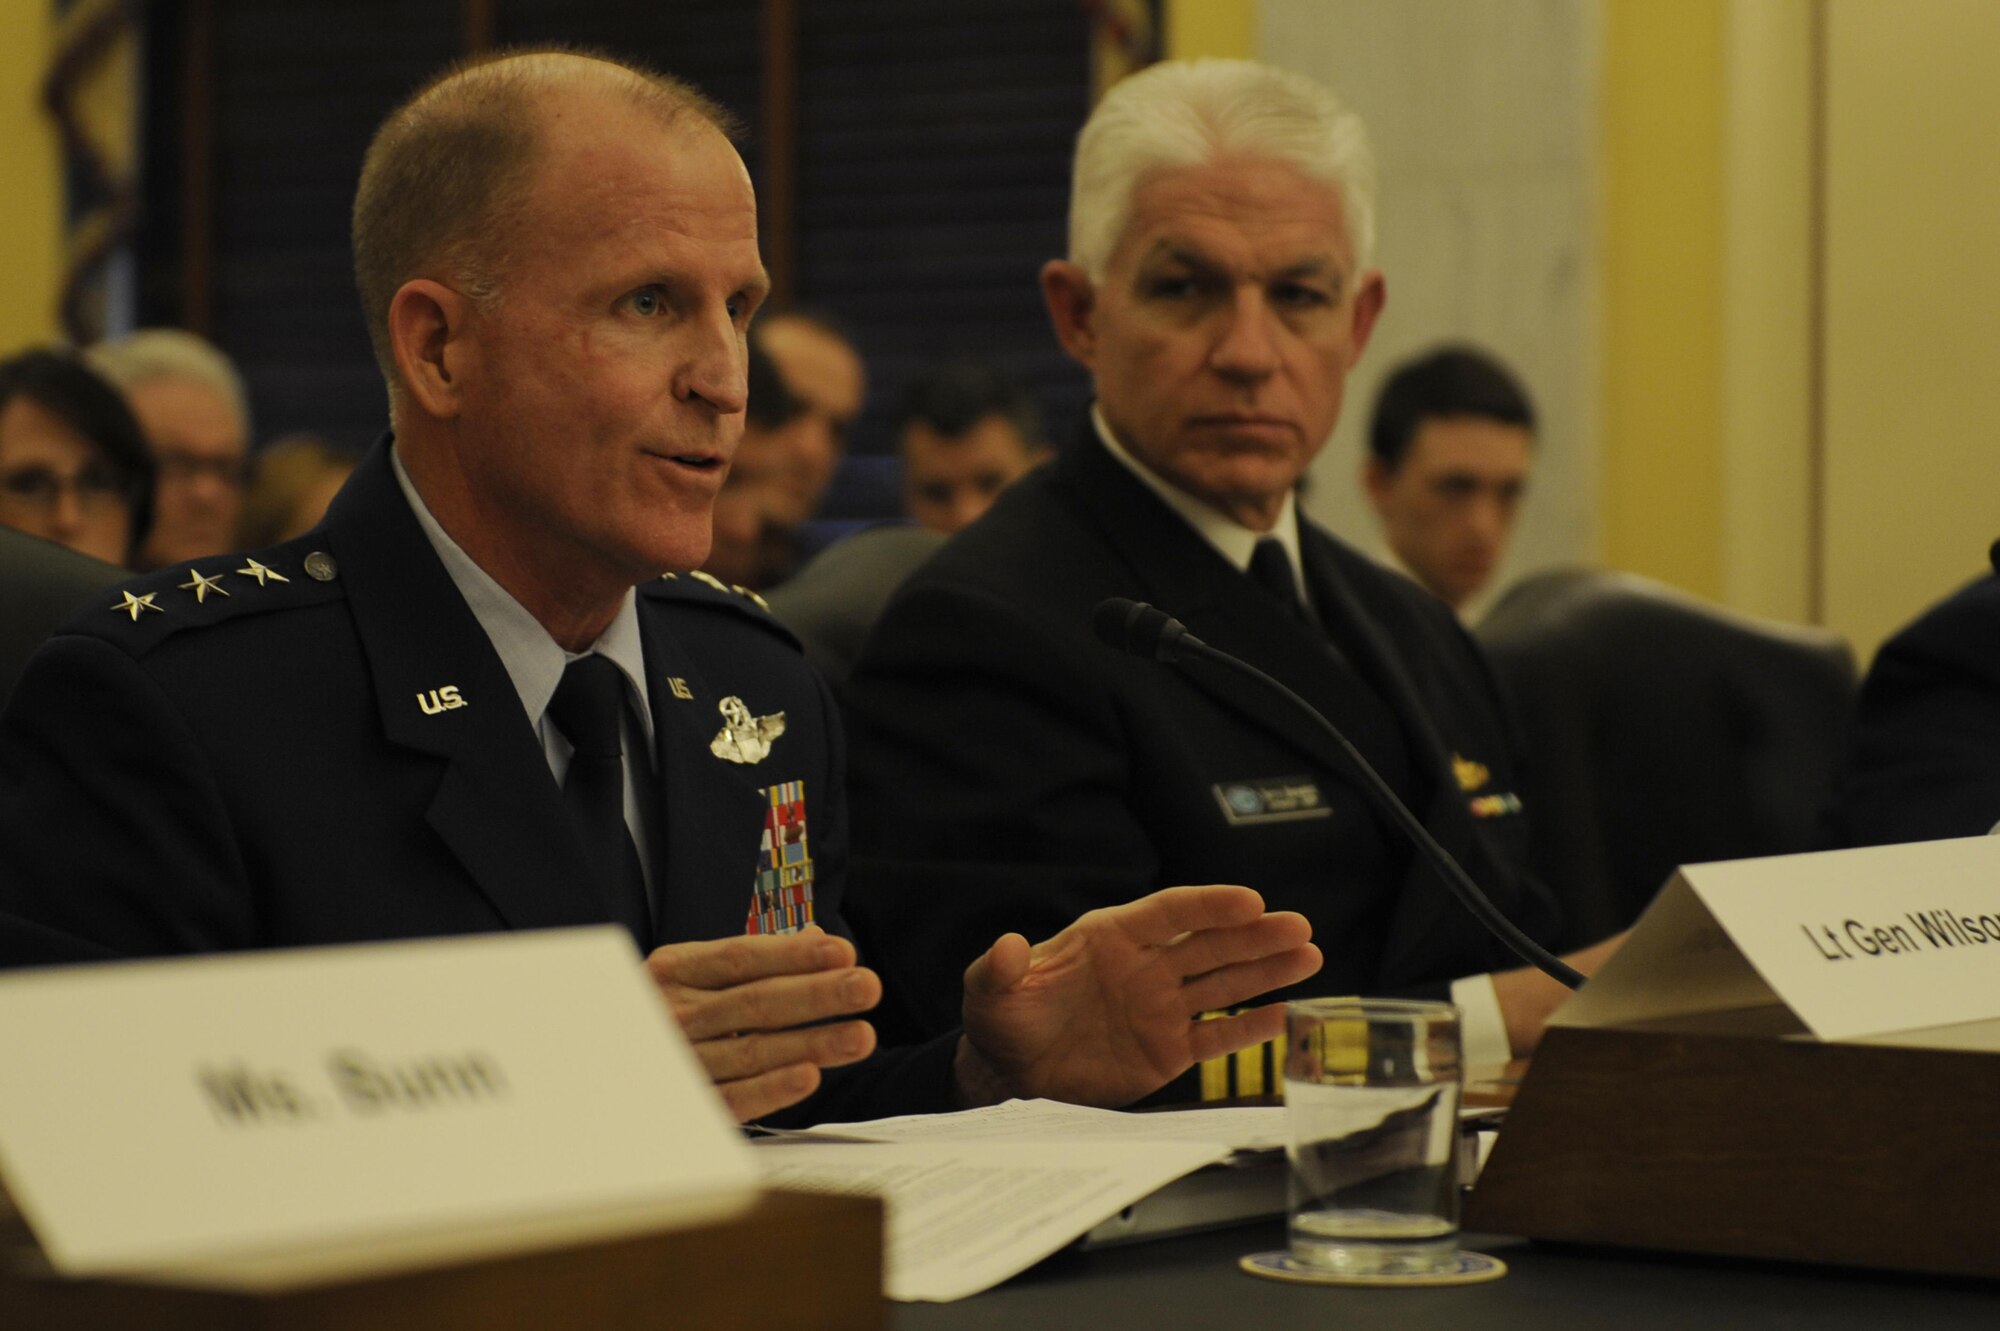 Lt. Gen. Stephen Wilson, Air Force Global Strike Command commander, testifies before the Senate Armed Service Committee’s Subcommittee on Strategic Forces, March 5. Wilson appeared before the subcommittee to answer questions regarding nuclear forces and policies in review of the Defense Authorization Request for Fiscal Year 2015 and the Future Years Defense Program.  (U.S. Air Force photo by Staff Sgt. Carlin Leslie)